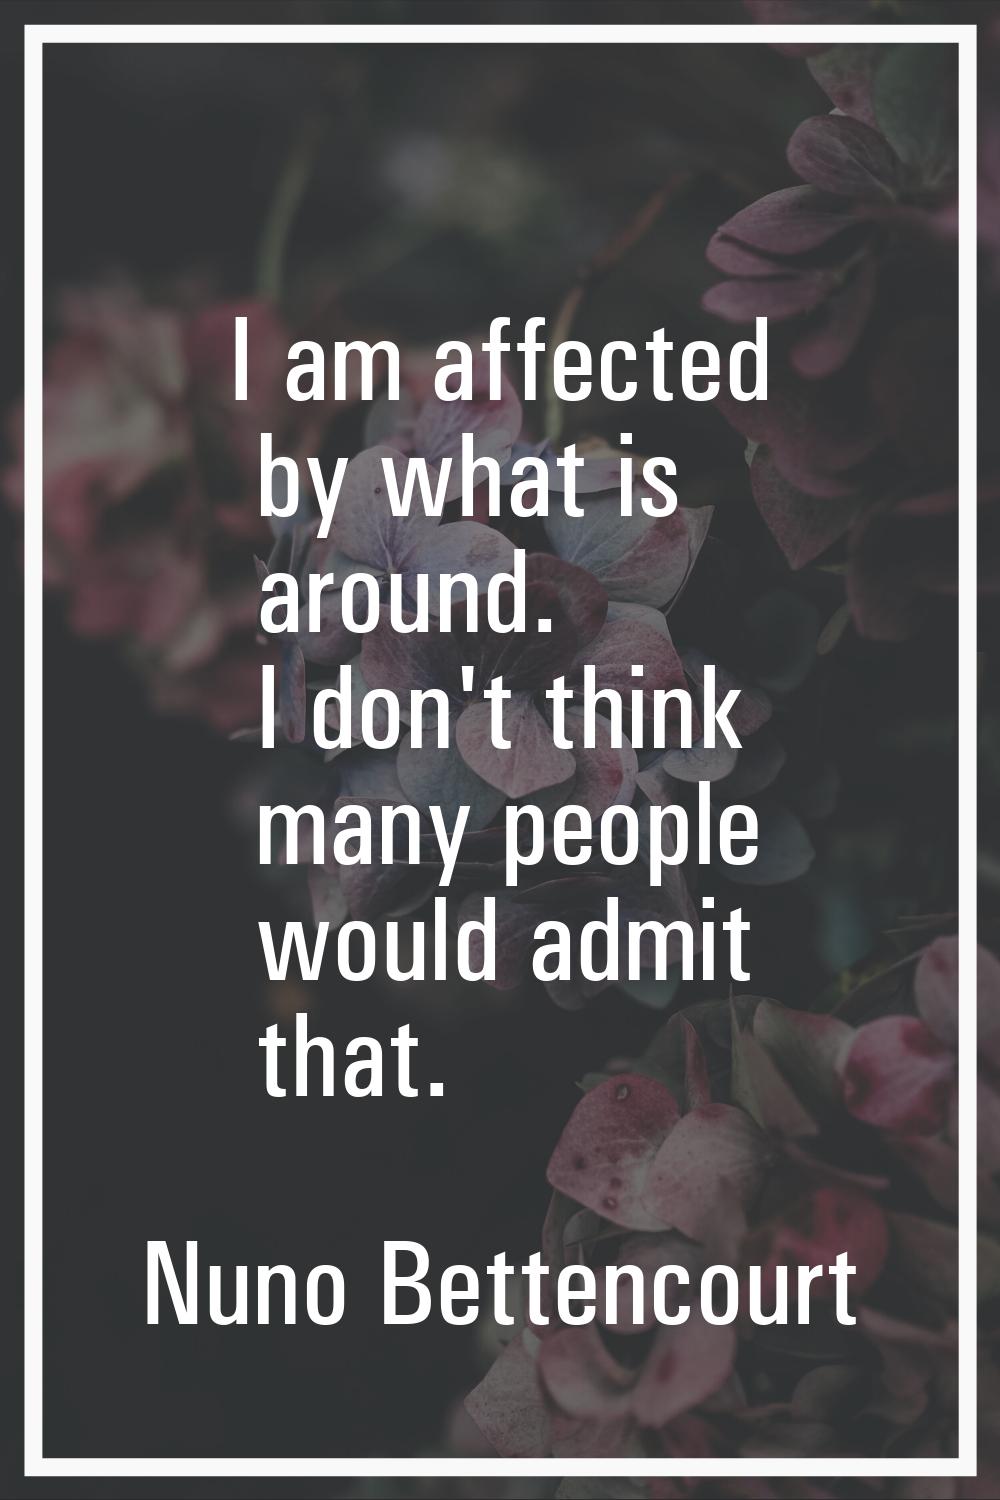 I am affected by what is around. I don't think many people would admit that.